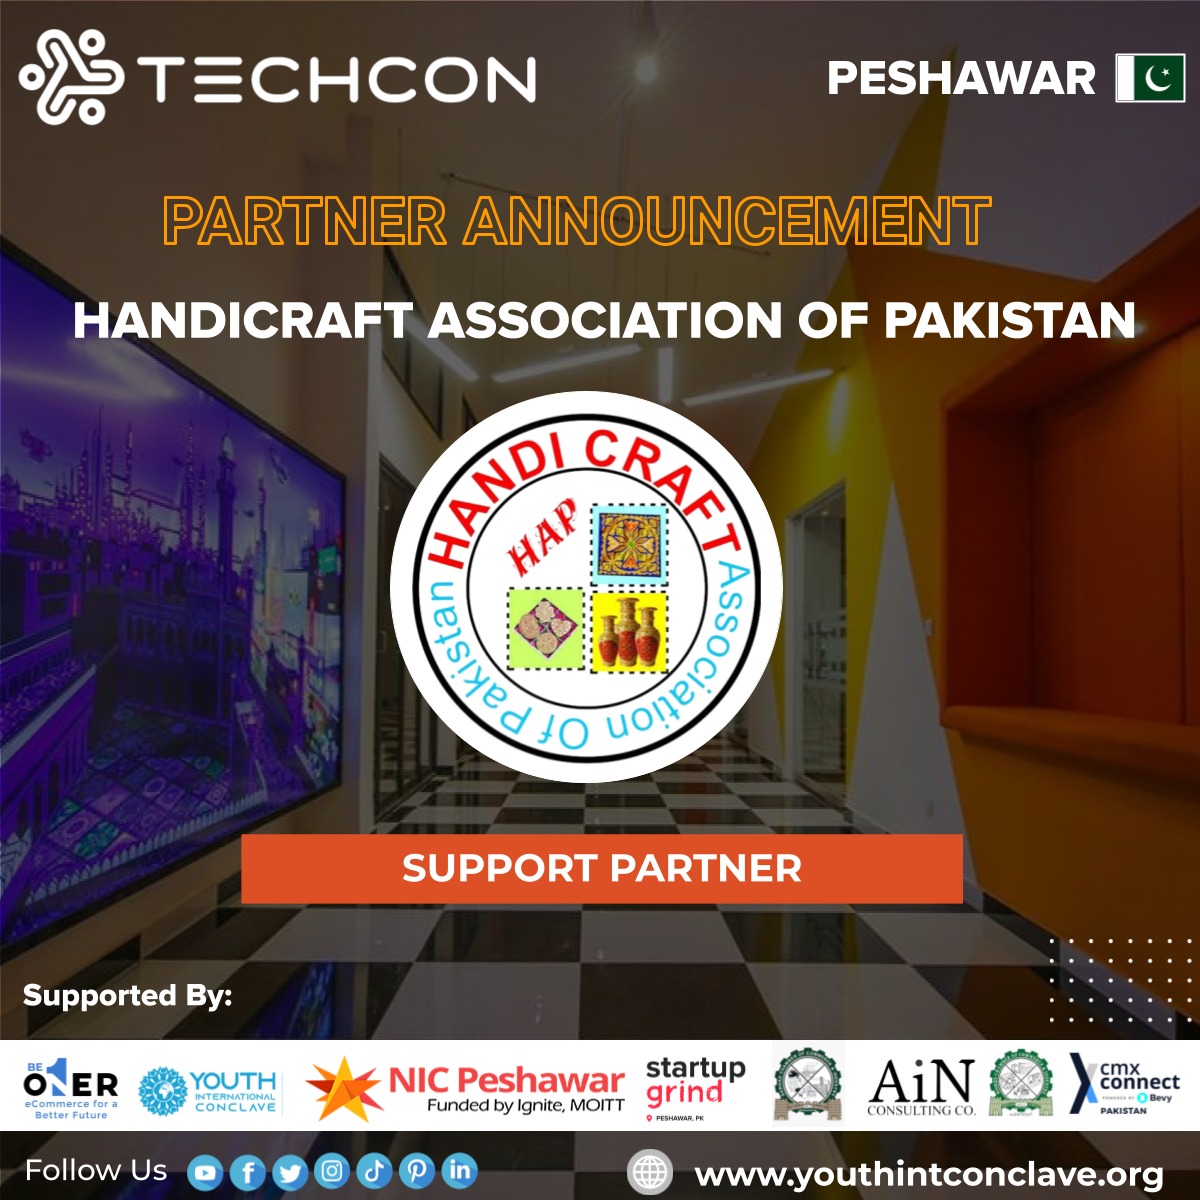 Announcement of the HANDICRAFTS ASSOCIATION OF PAKISTAN as the support partner of the event.